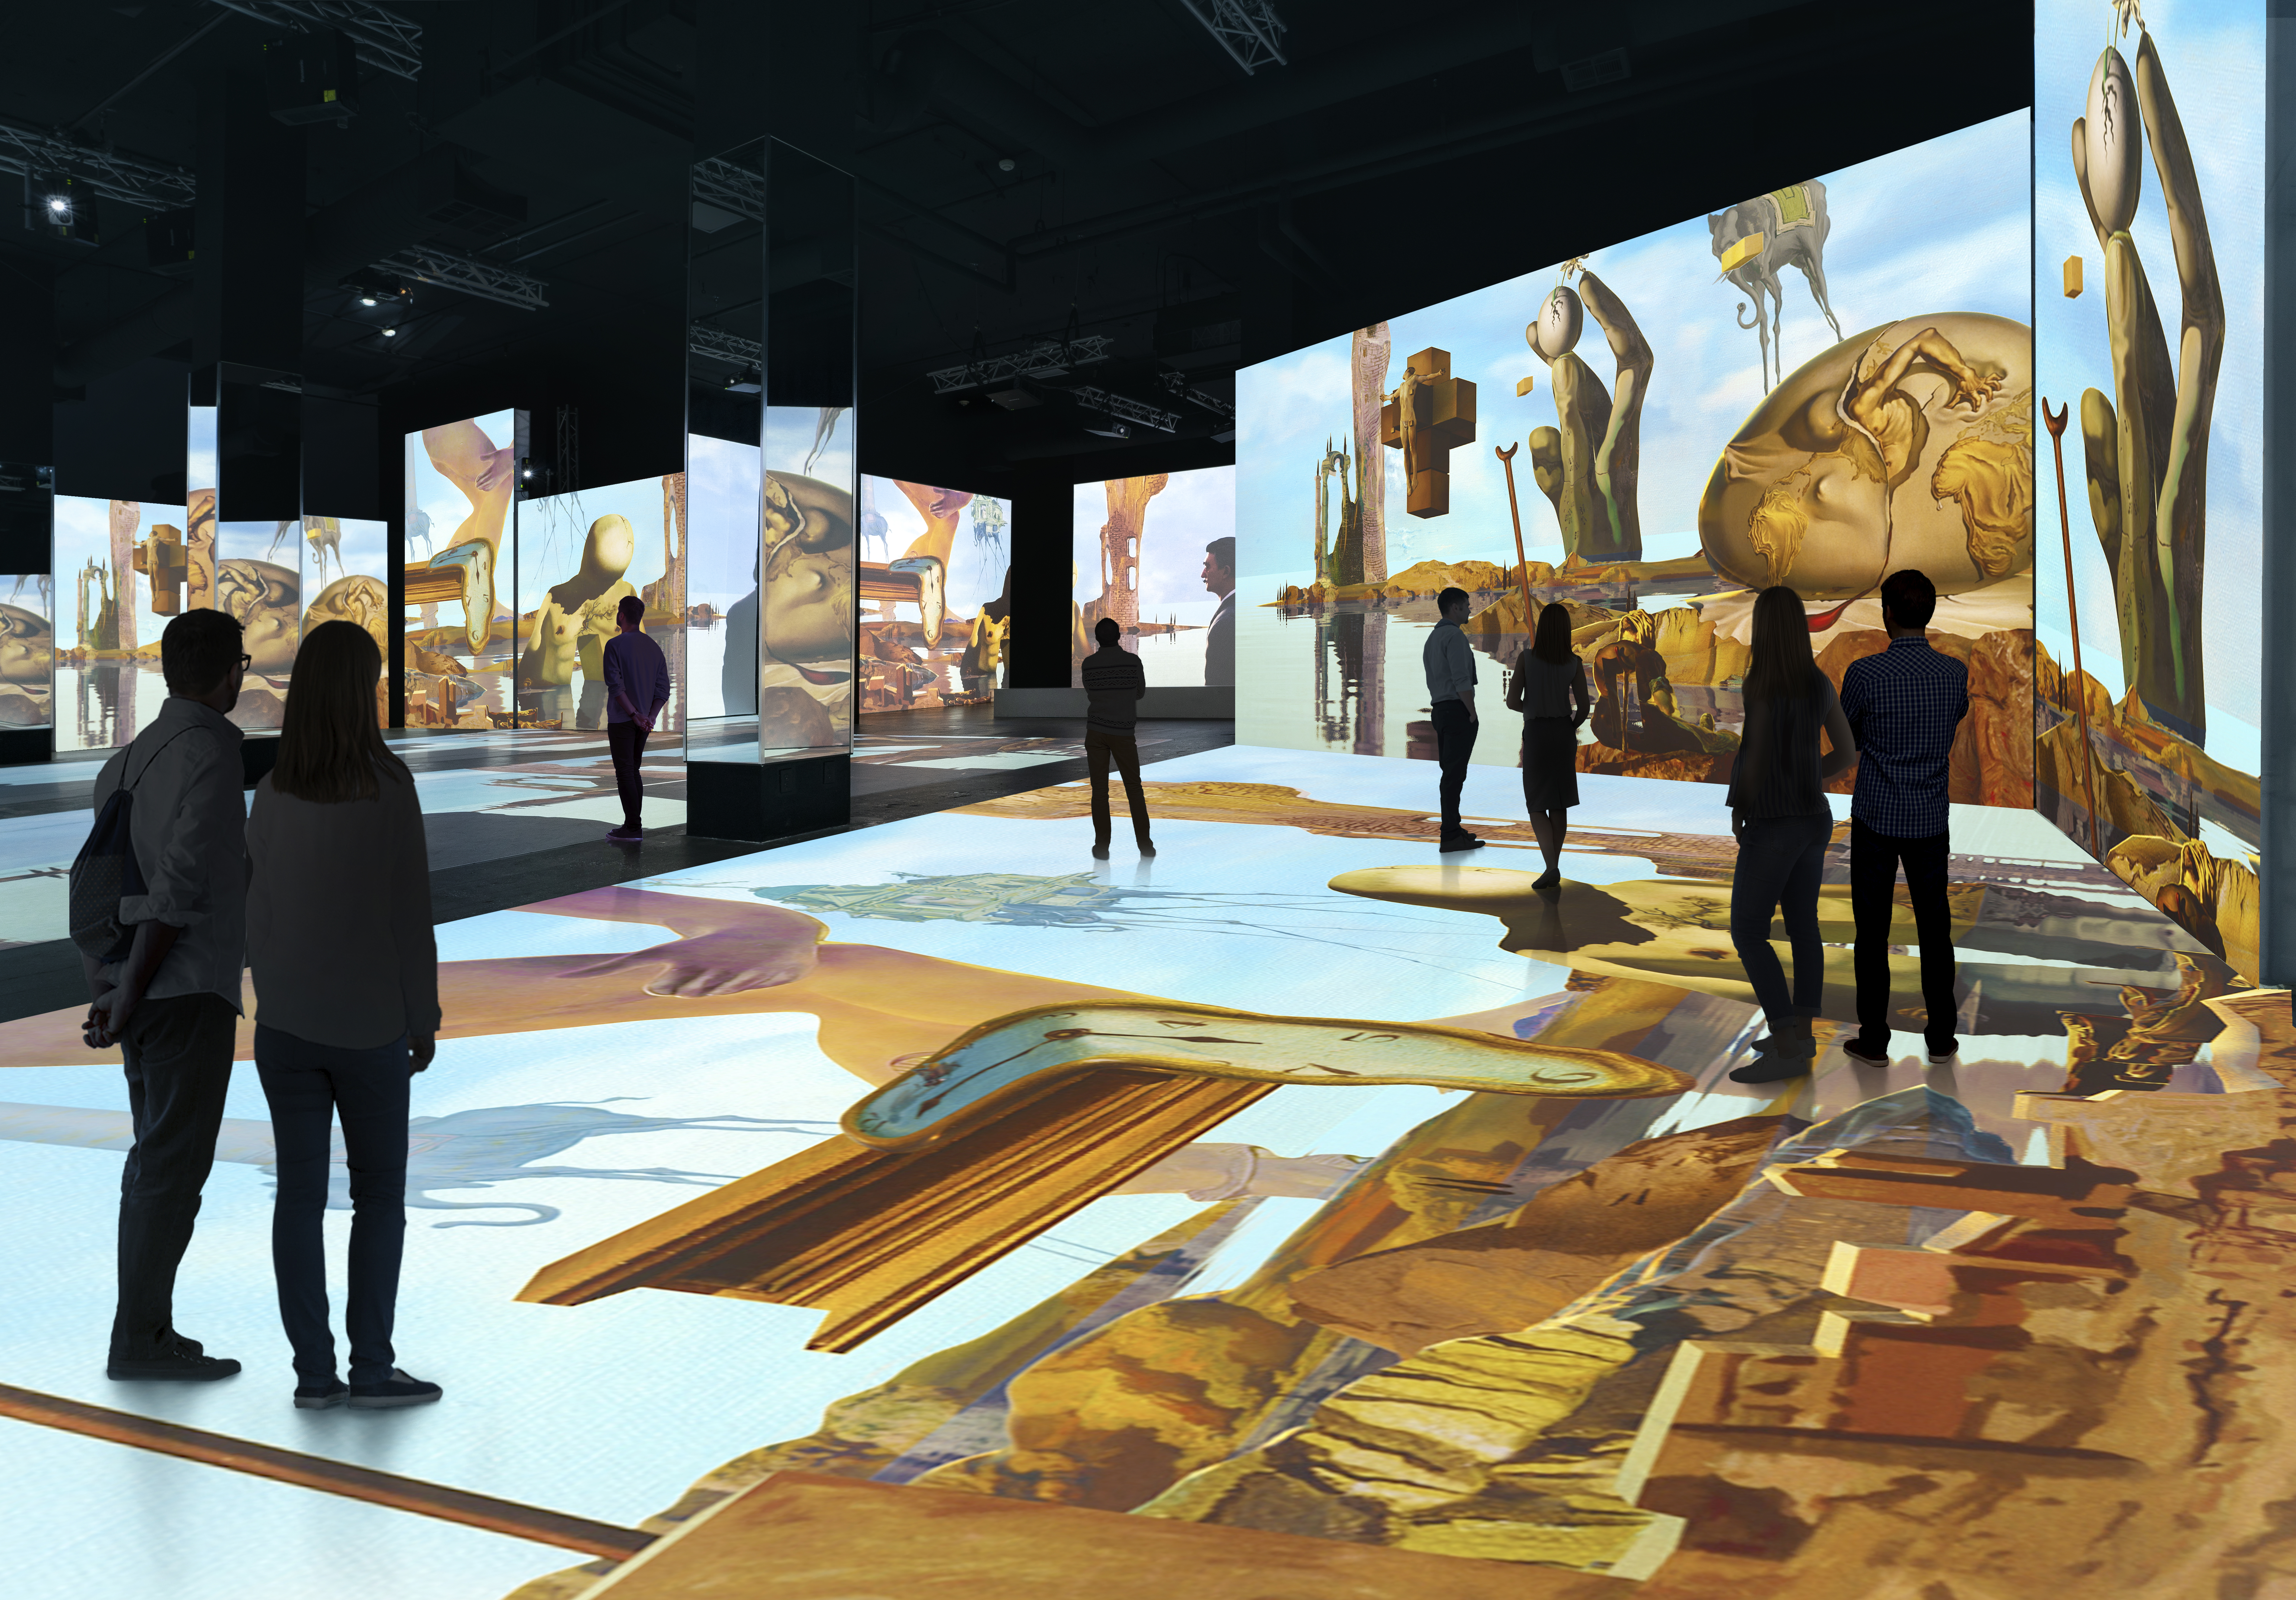  Yet another scene from the immersive Dali Alive art experience, which will debut in Aurora, Colo., in October. Image credit: Dali Alive © 2022 by the Salvador Dali Museum, Inc. St. Petersburg, FL and Grande Experiences. Worldwide rights ©Salvador Dali, Fundacio Gala-Salvador Dali.